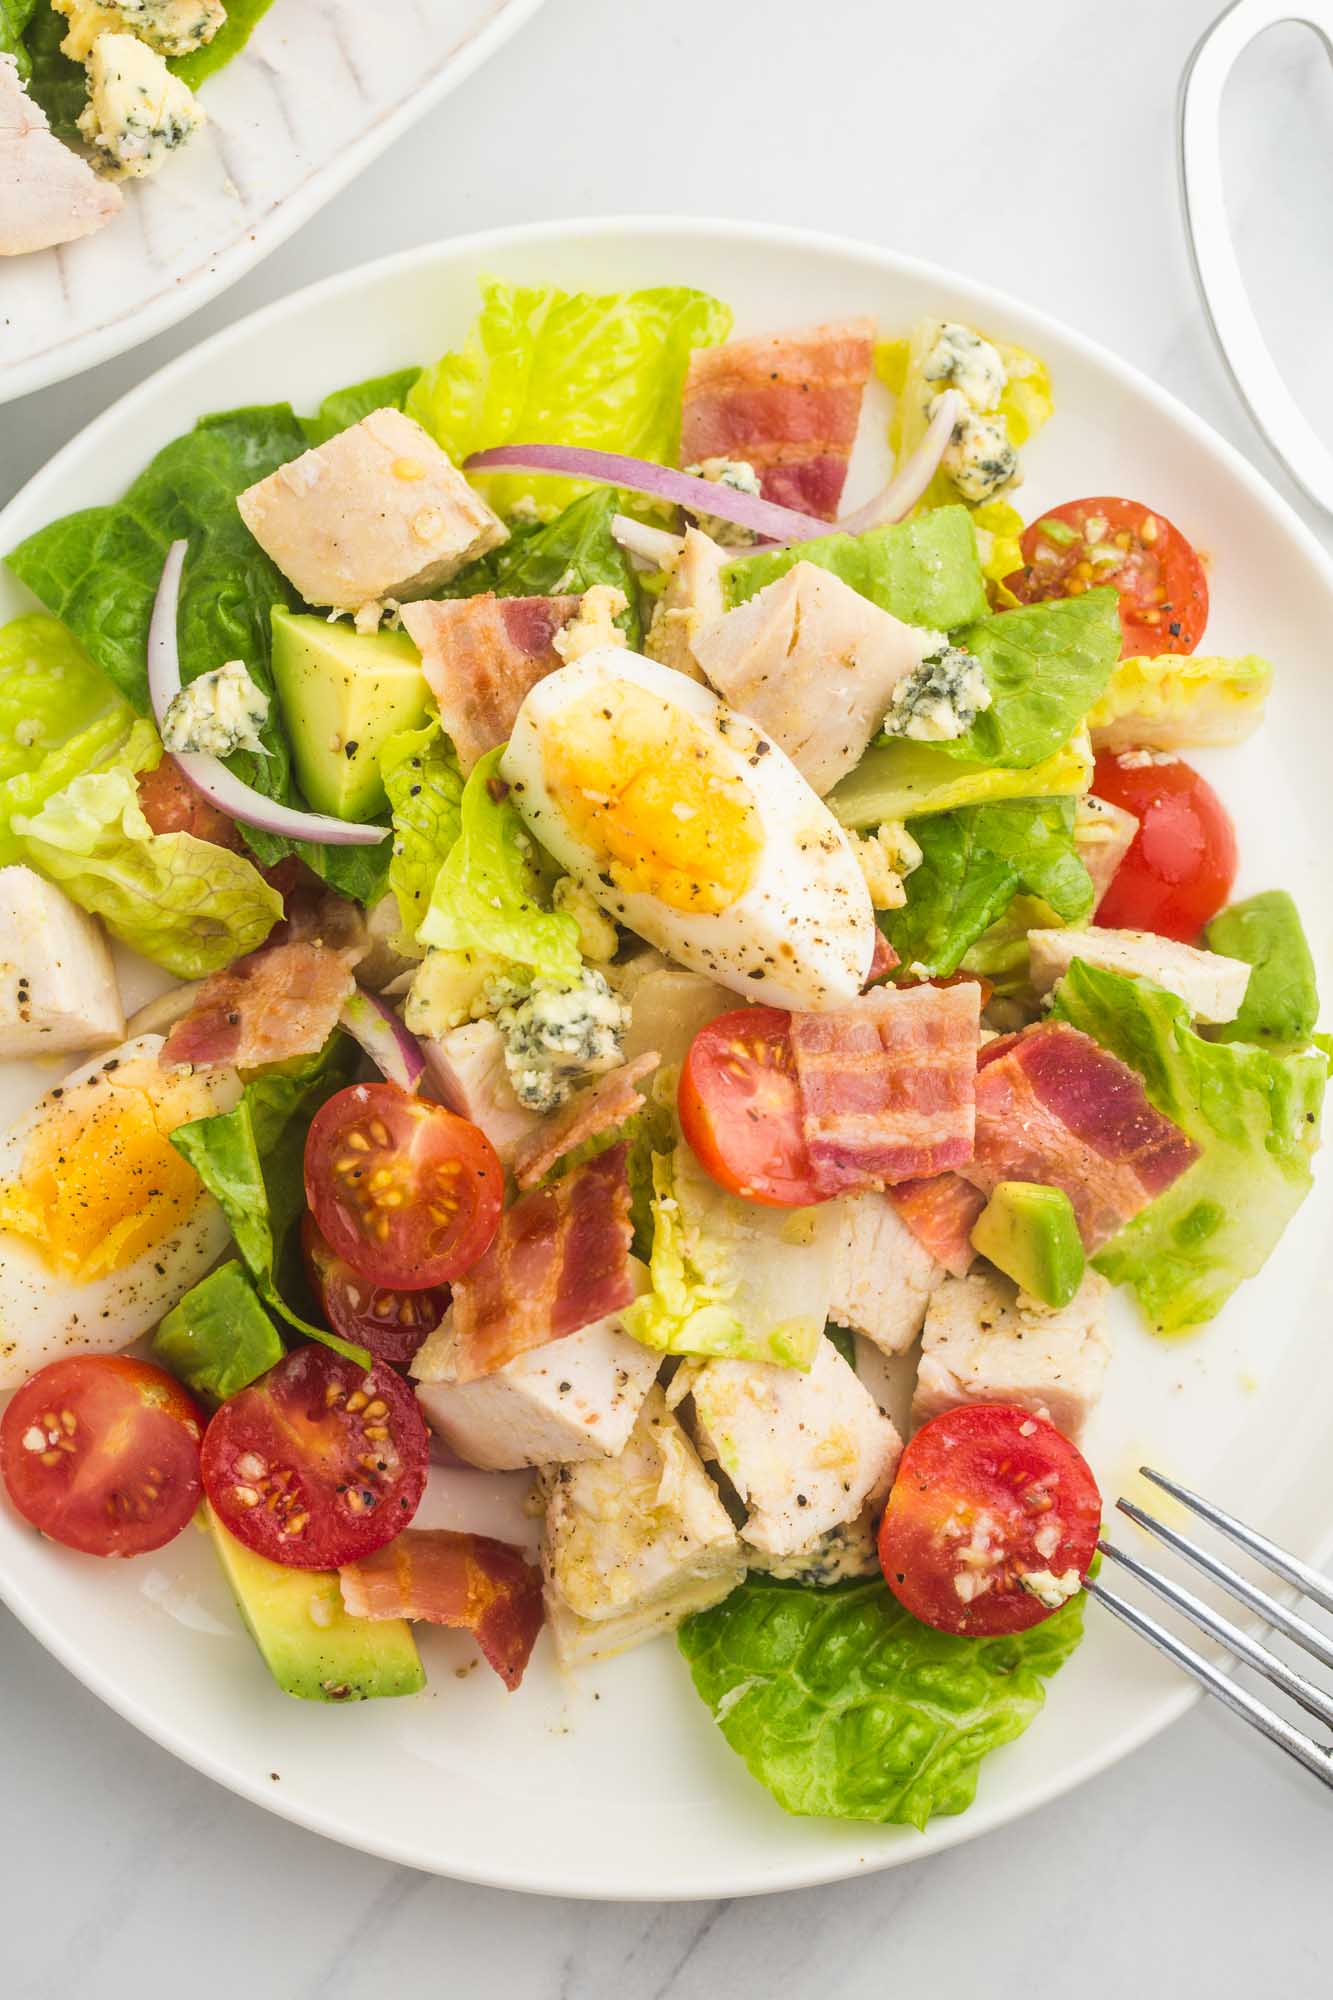 Cobb salad with chicken on a dinner plate